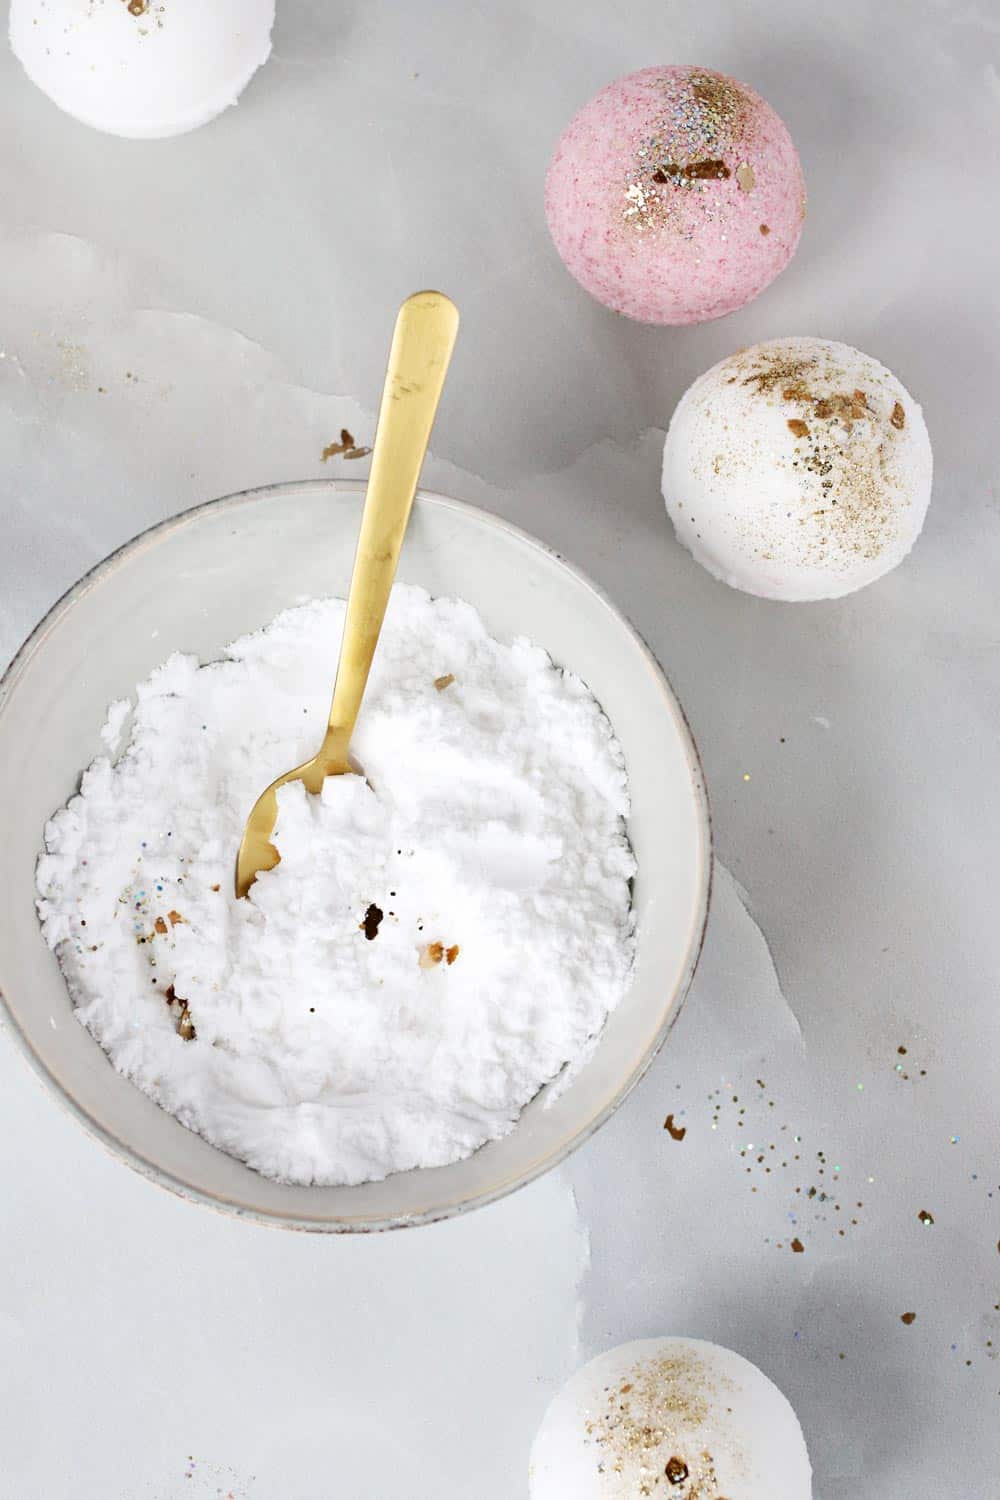 Combine dry ingredients for making homemade bath bombs